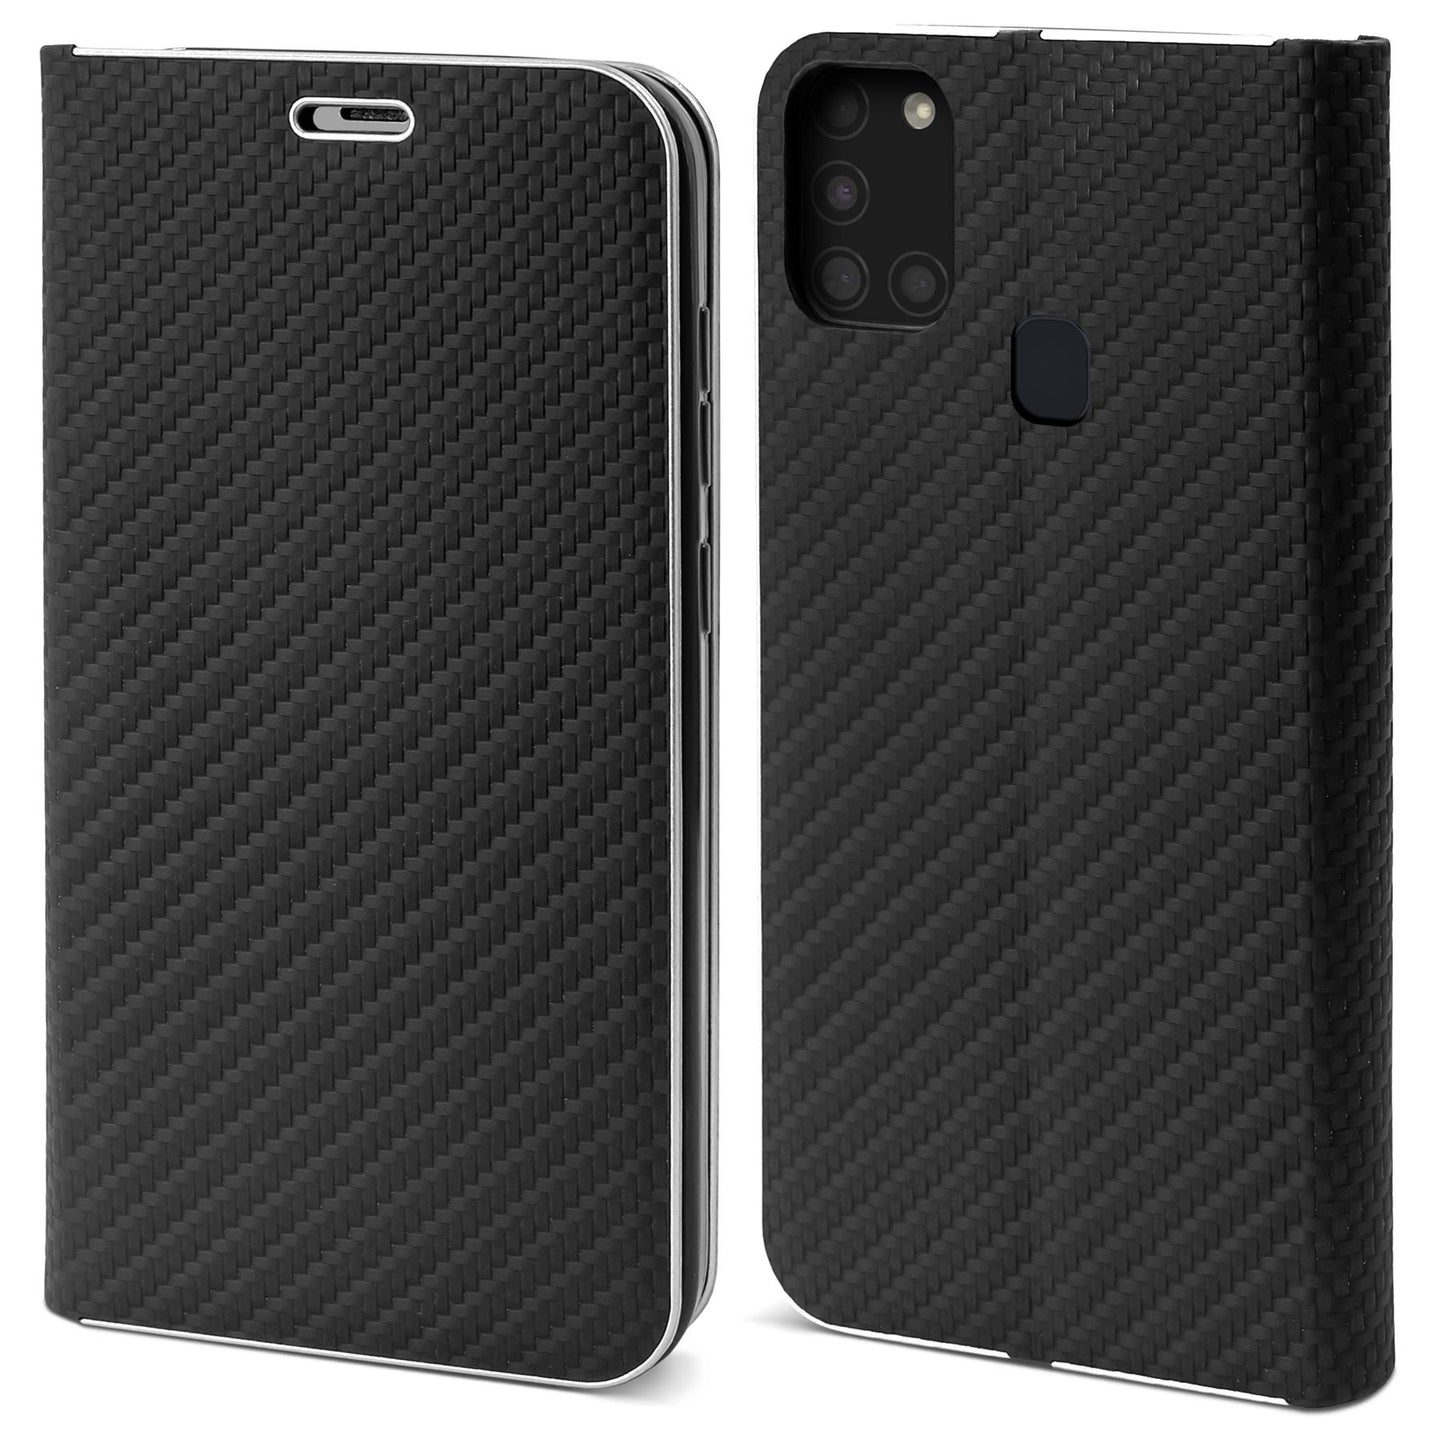 Moozy Wallet Case for Samsung A21s, Black Carbon – Metallic Edge Protection Magnetic Closure Flip Cover with Card Holder